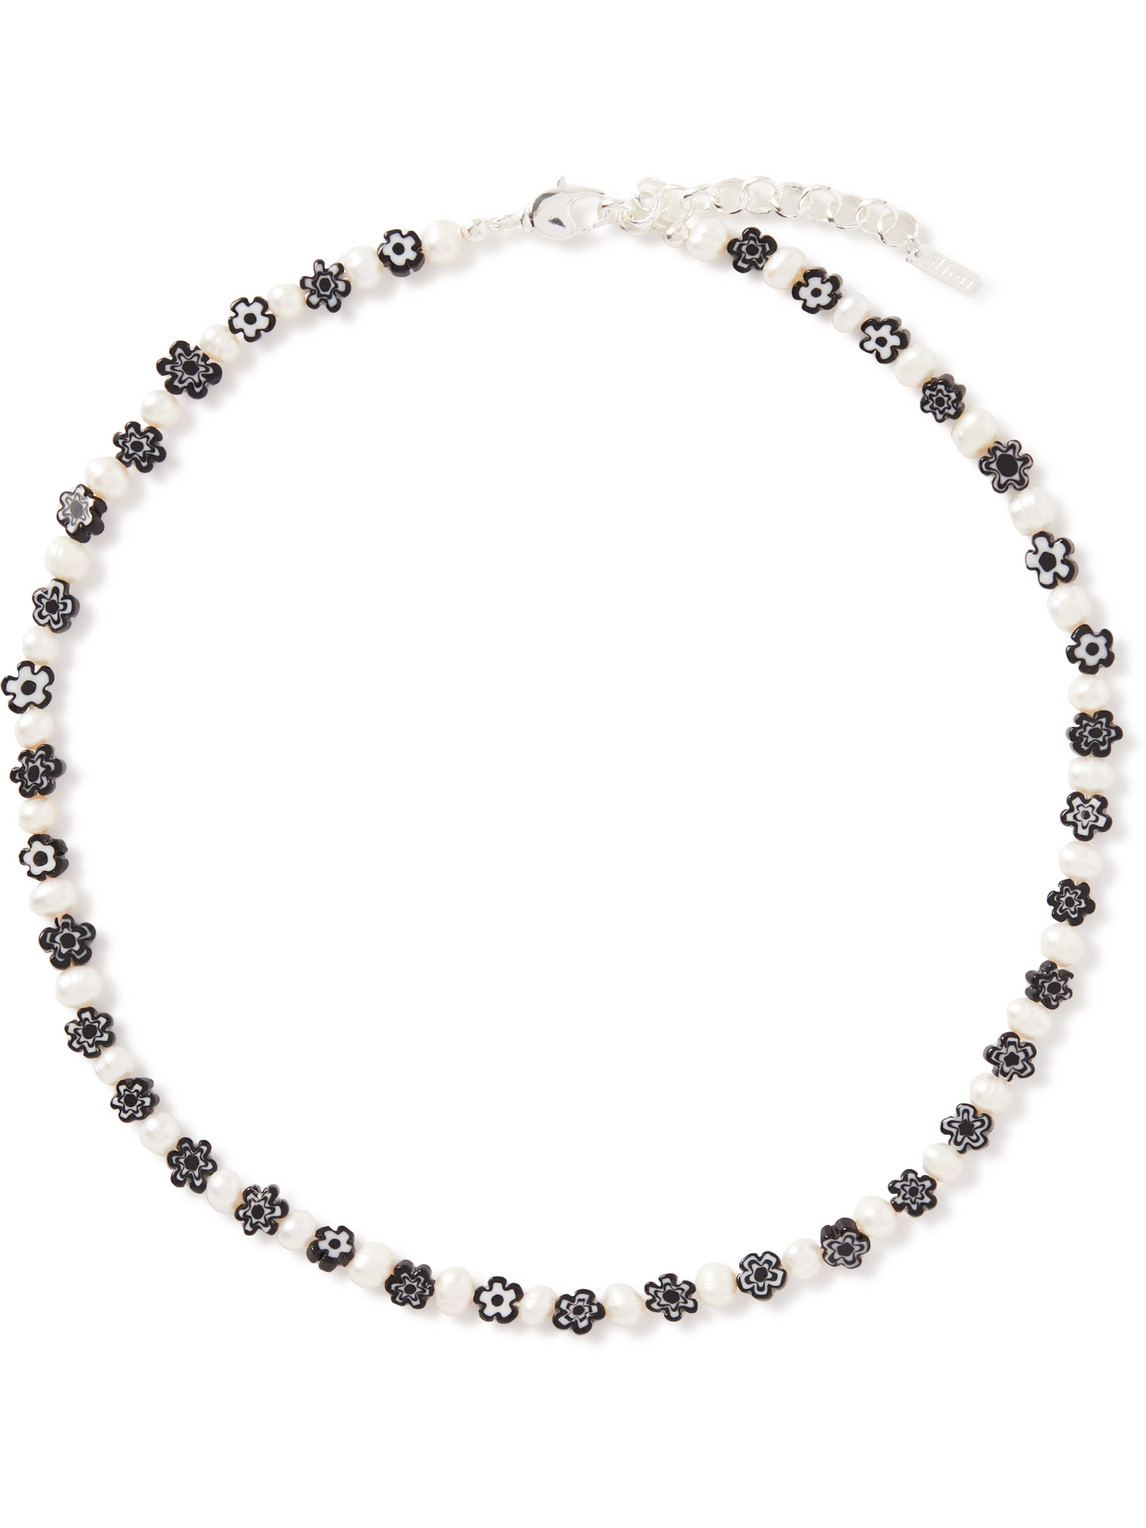 éliou Jengo Silver, Pearl and Glass Beaded Necklace